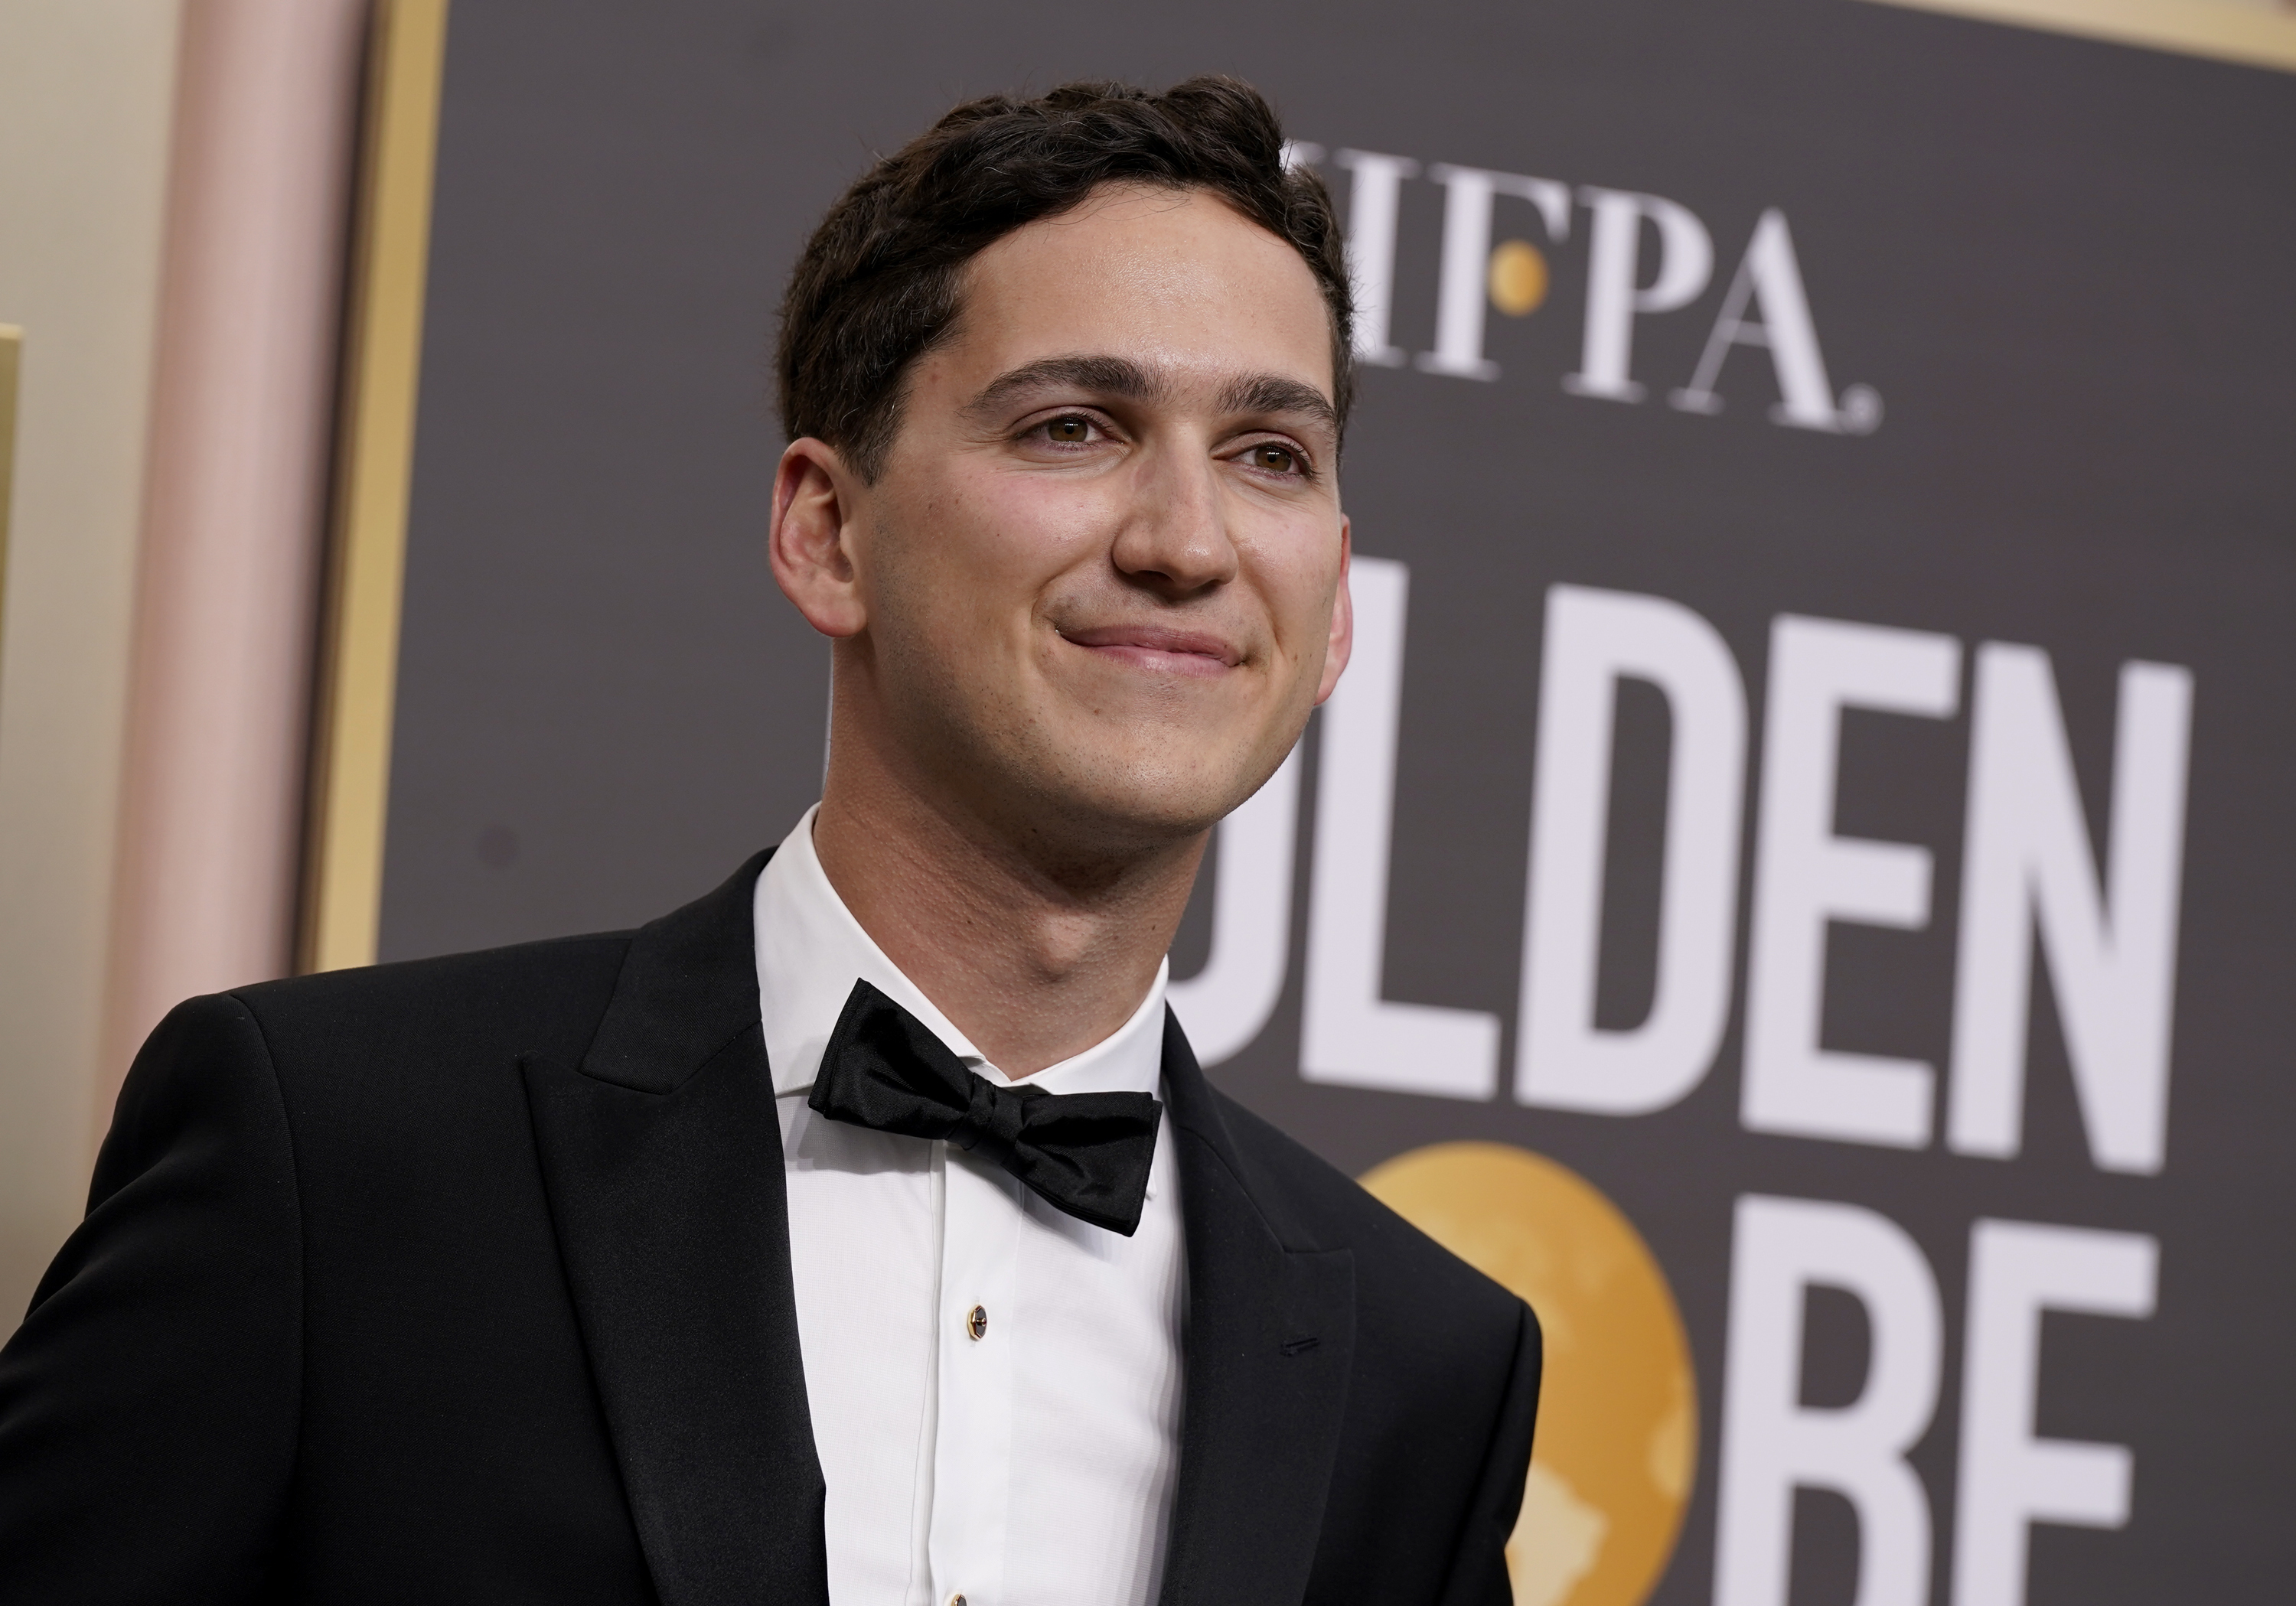 Matt Friend arrives at the 80th annual Golden Globe Awards at the Beverly Hilton Hotel on Tuesday, Jan. 10, 2023, in Beverly Hills, Calif. (Photo by Jordan Strauss/Invision/AP)